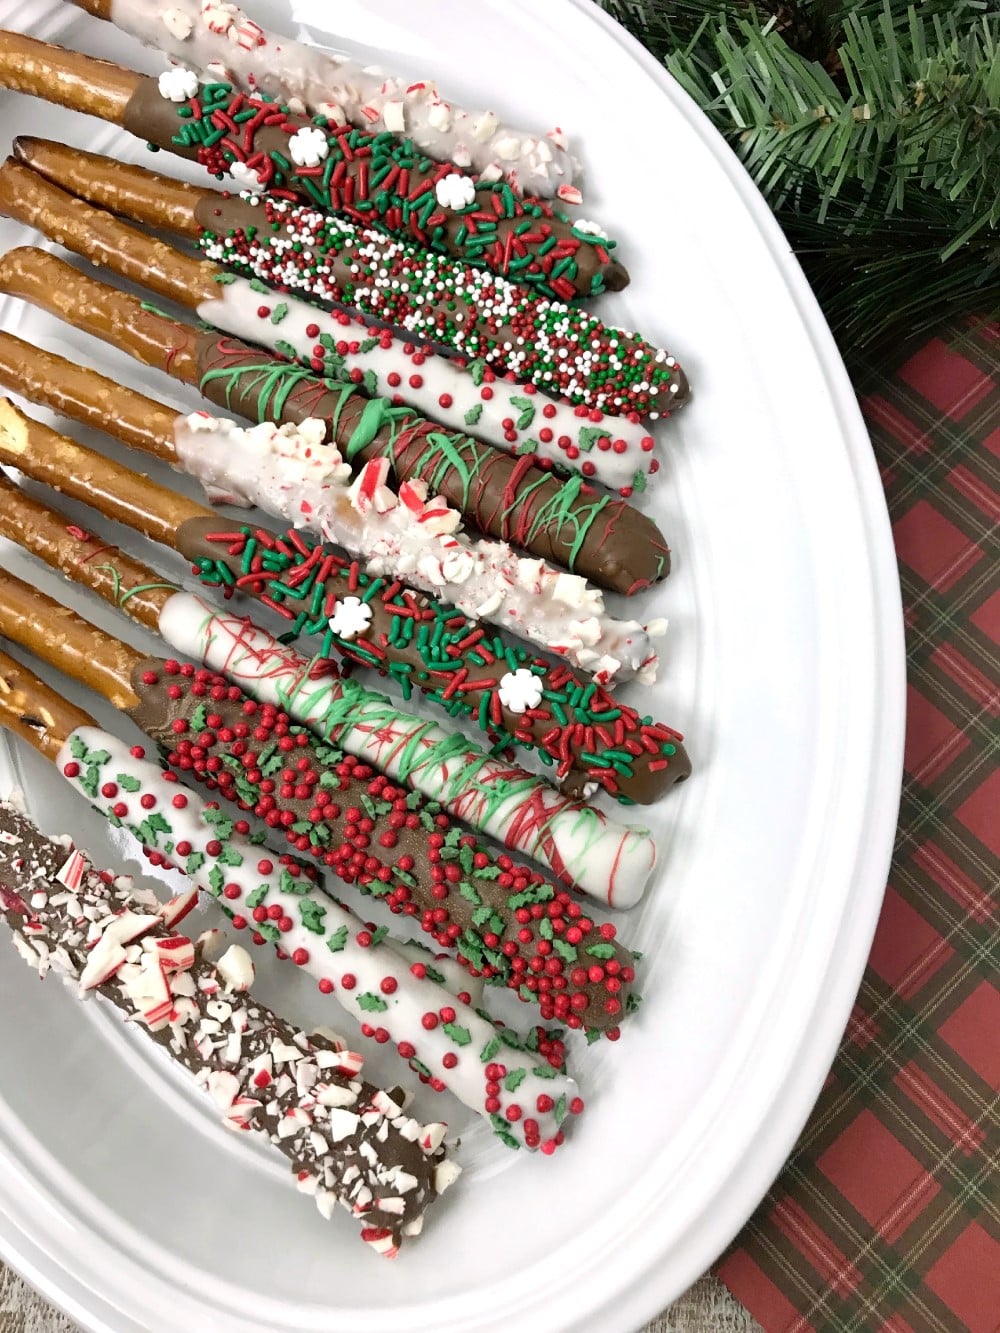 Chocolate-Covered Holiday Pretzel Rods